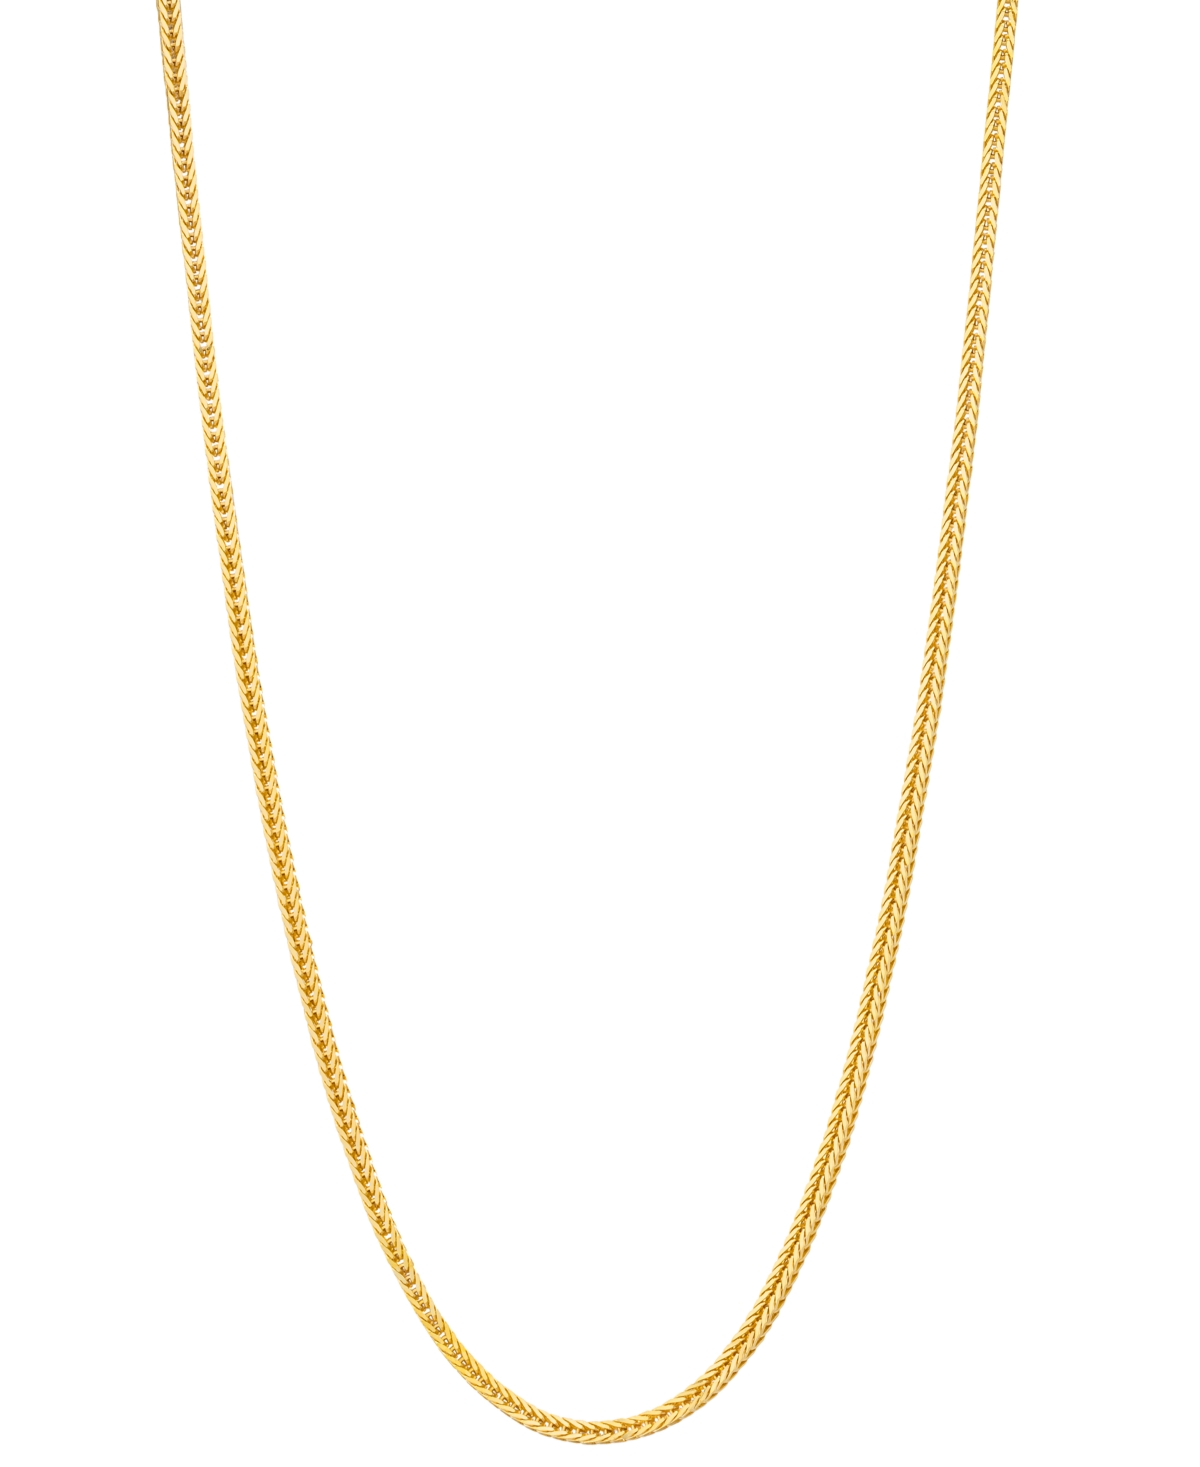 18" Foxtail Chain Necklace (1-1/3mm) in 14k Gold - Yellow Gold